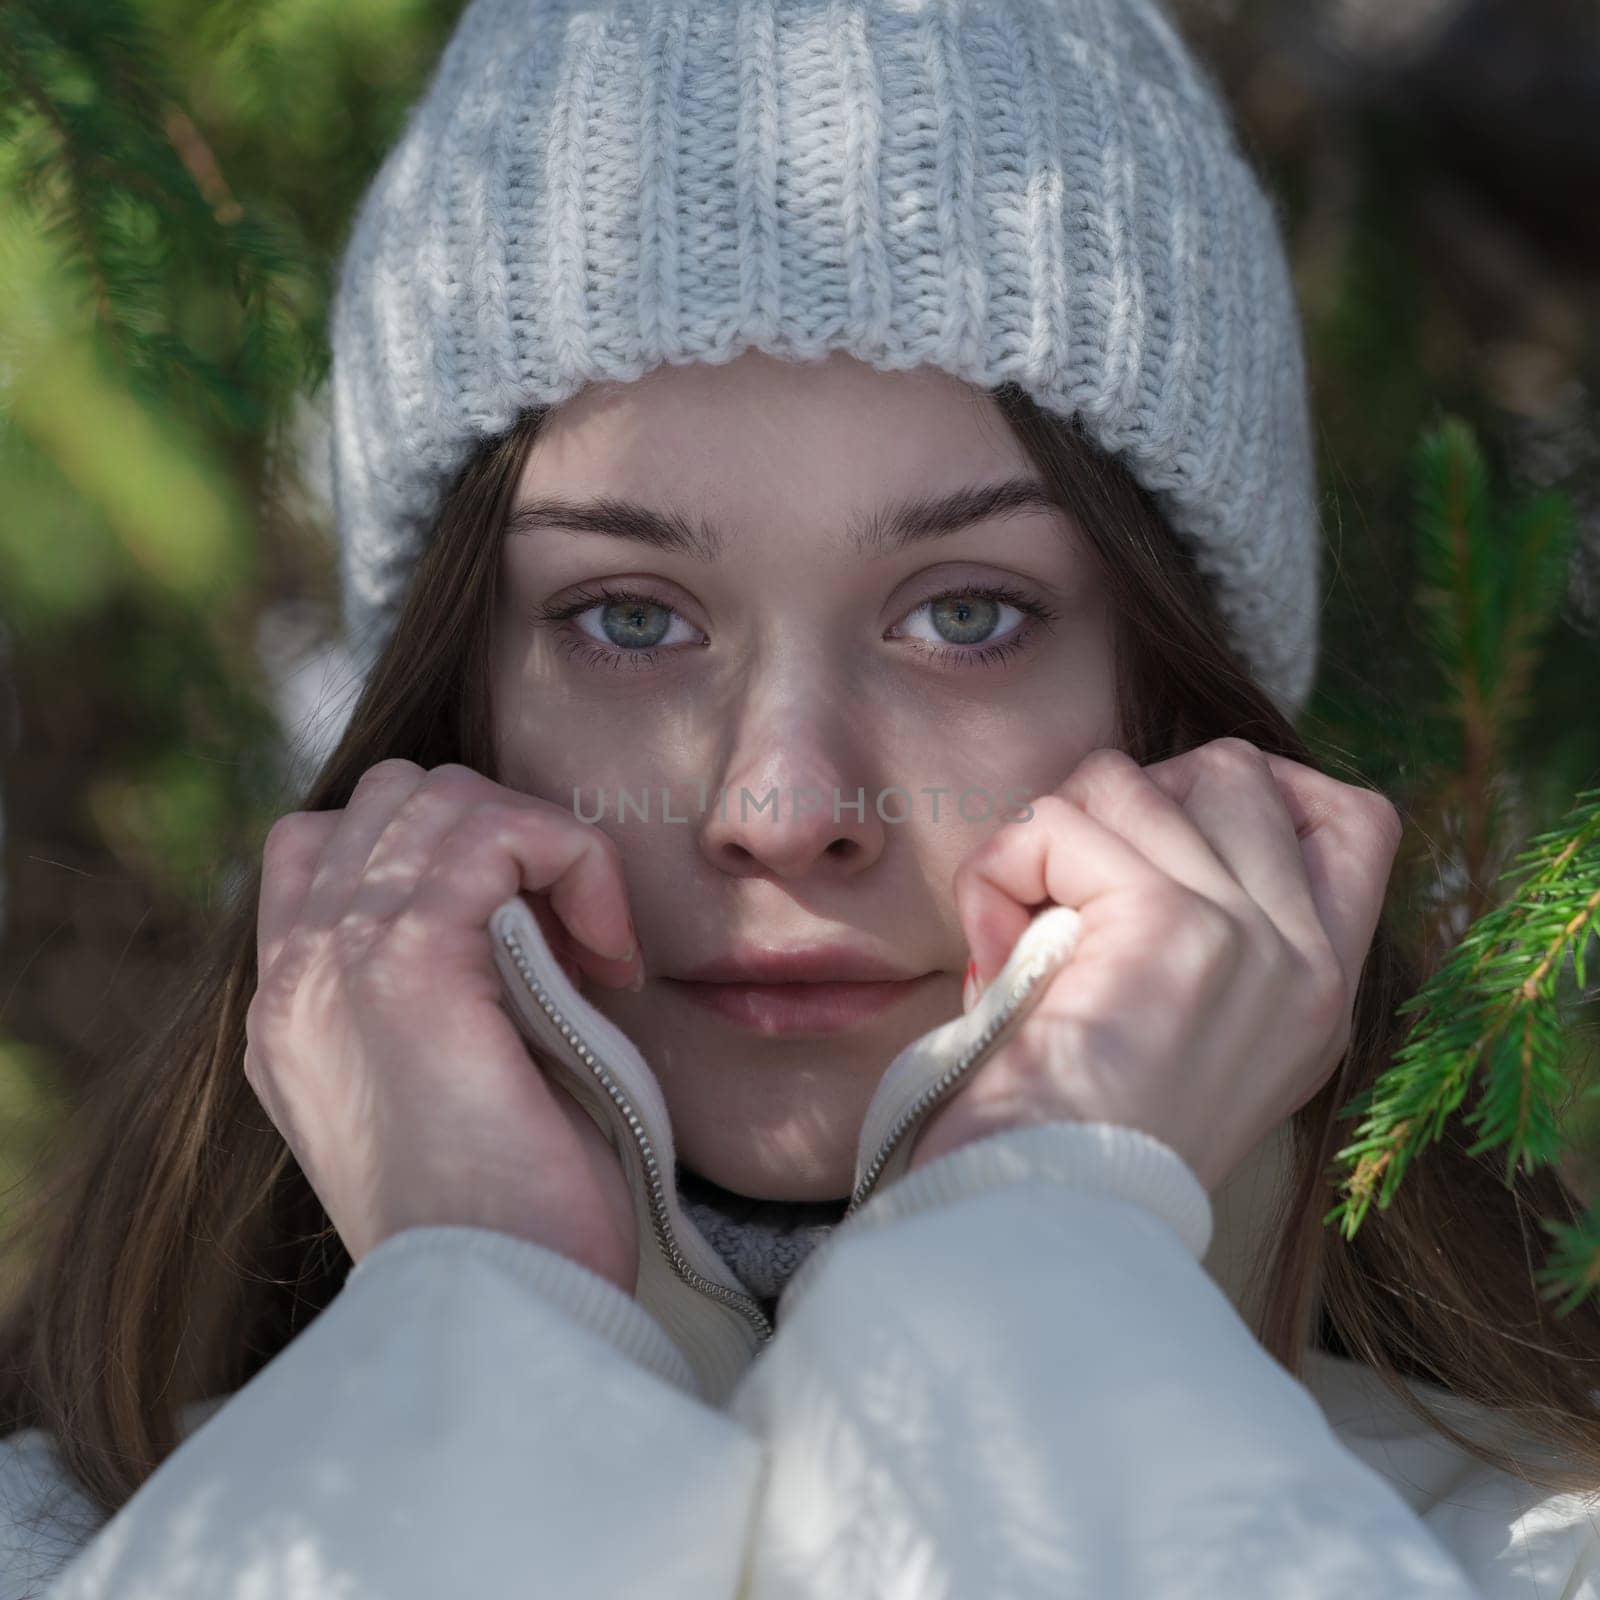 Cropped shot of teenager holding collar of bomber jacket with his hands in cold winter weather in forest, looking at camera. 17 year old model with gray eyes, no make-up wearing in knit hat, jacket